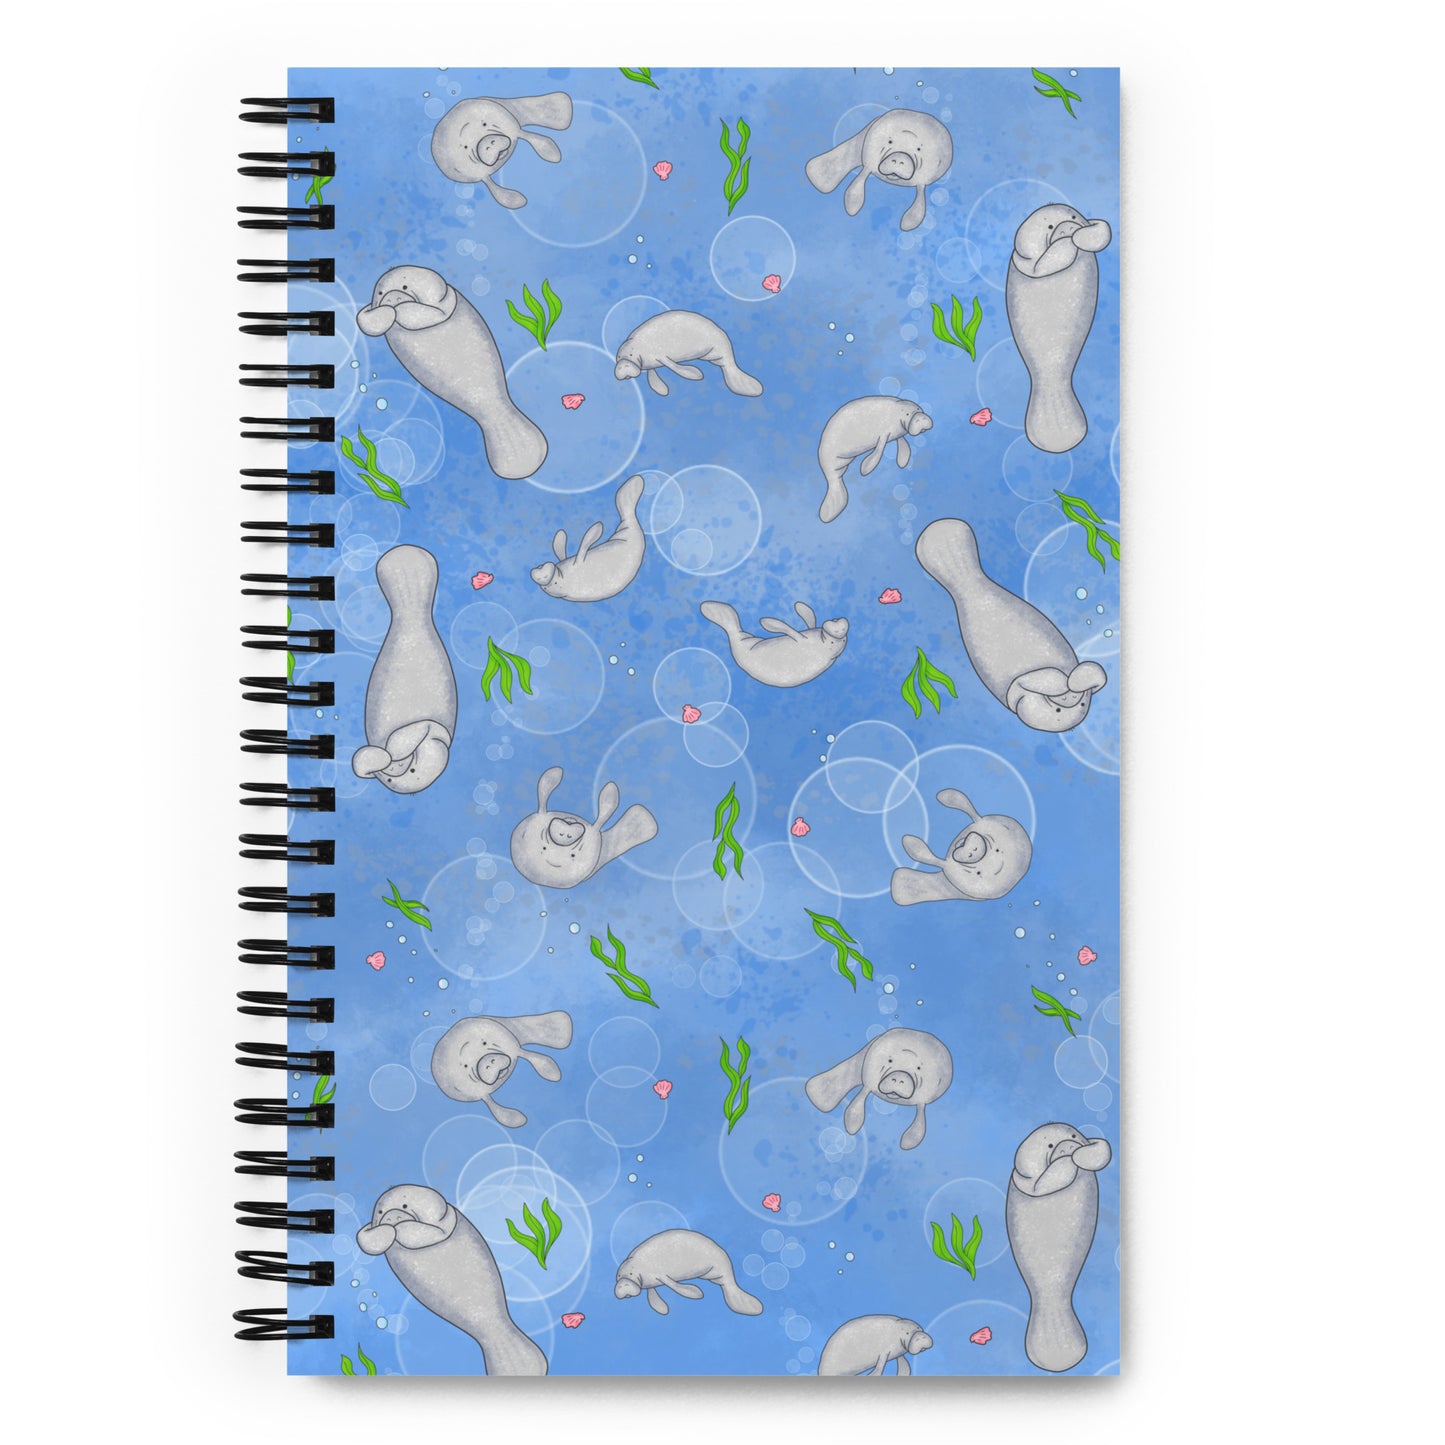 Spiral bound notebook with soft touch cover and 140 dotted pages. Cover features cute illustrated manatees swimming in the water. Measures 5.5 inches by 8.5 inches.